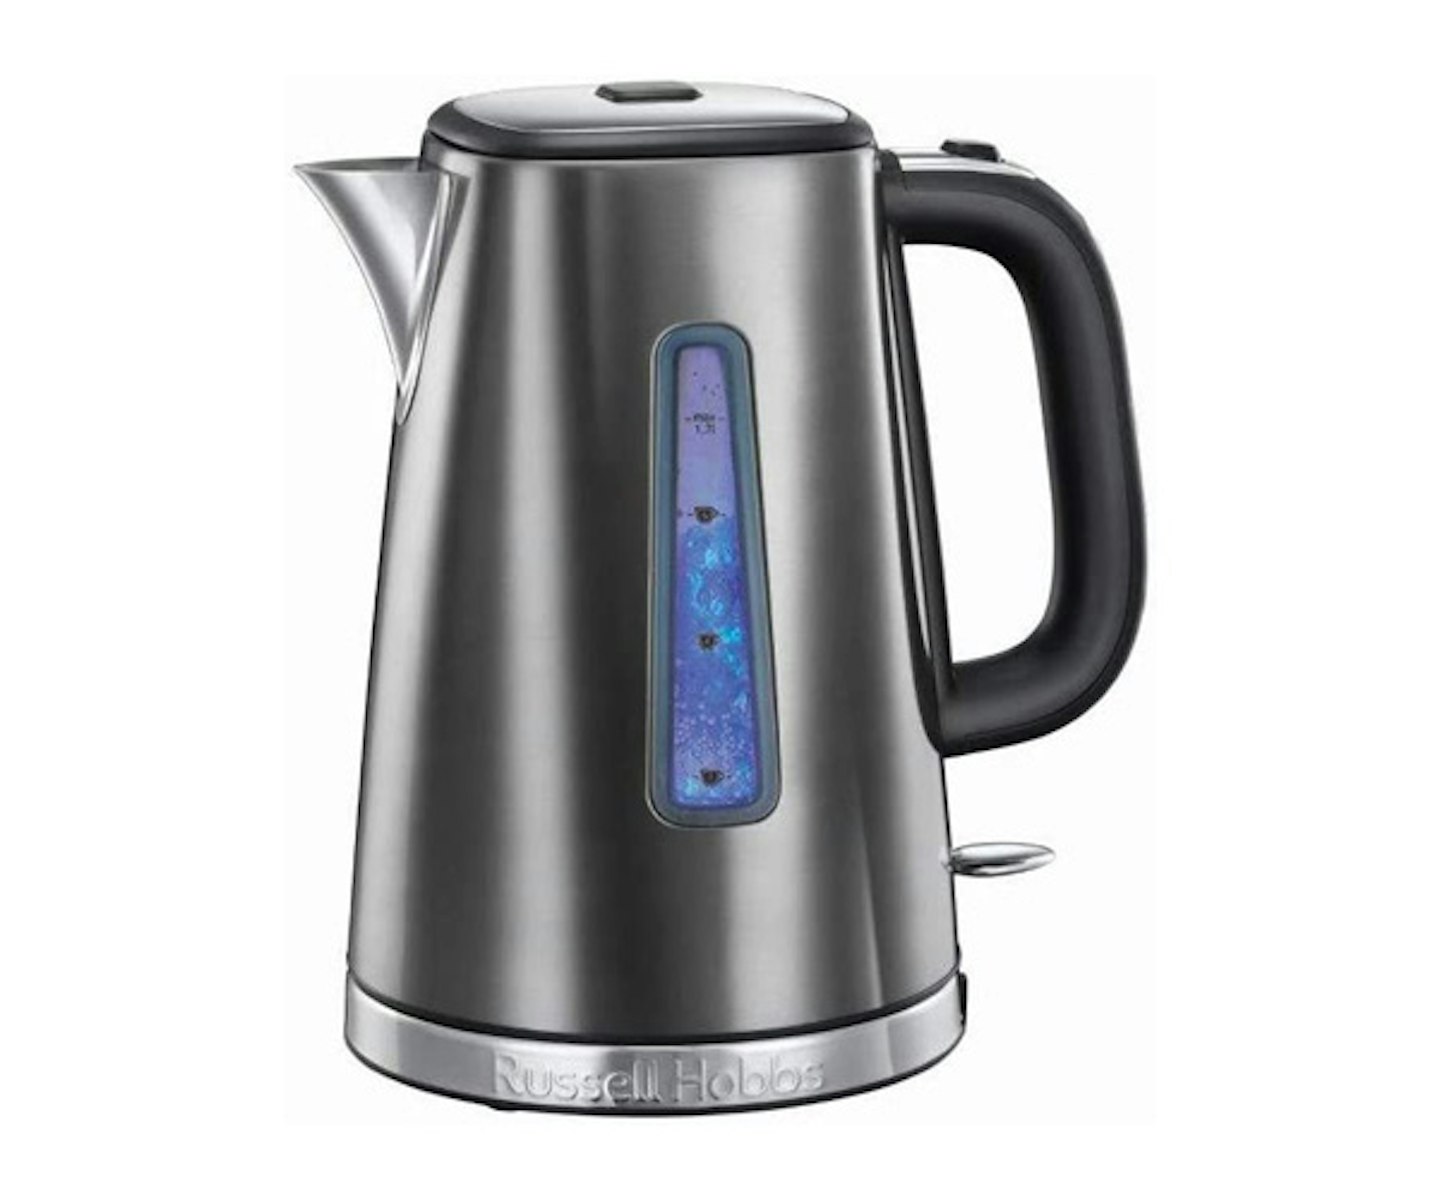 Russell Hobbs 23211 Luna Quiet Boil Electric Kettle